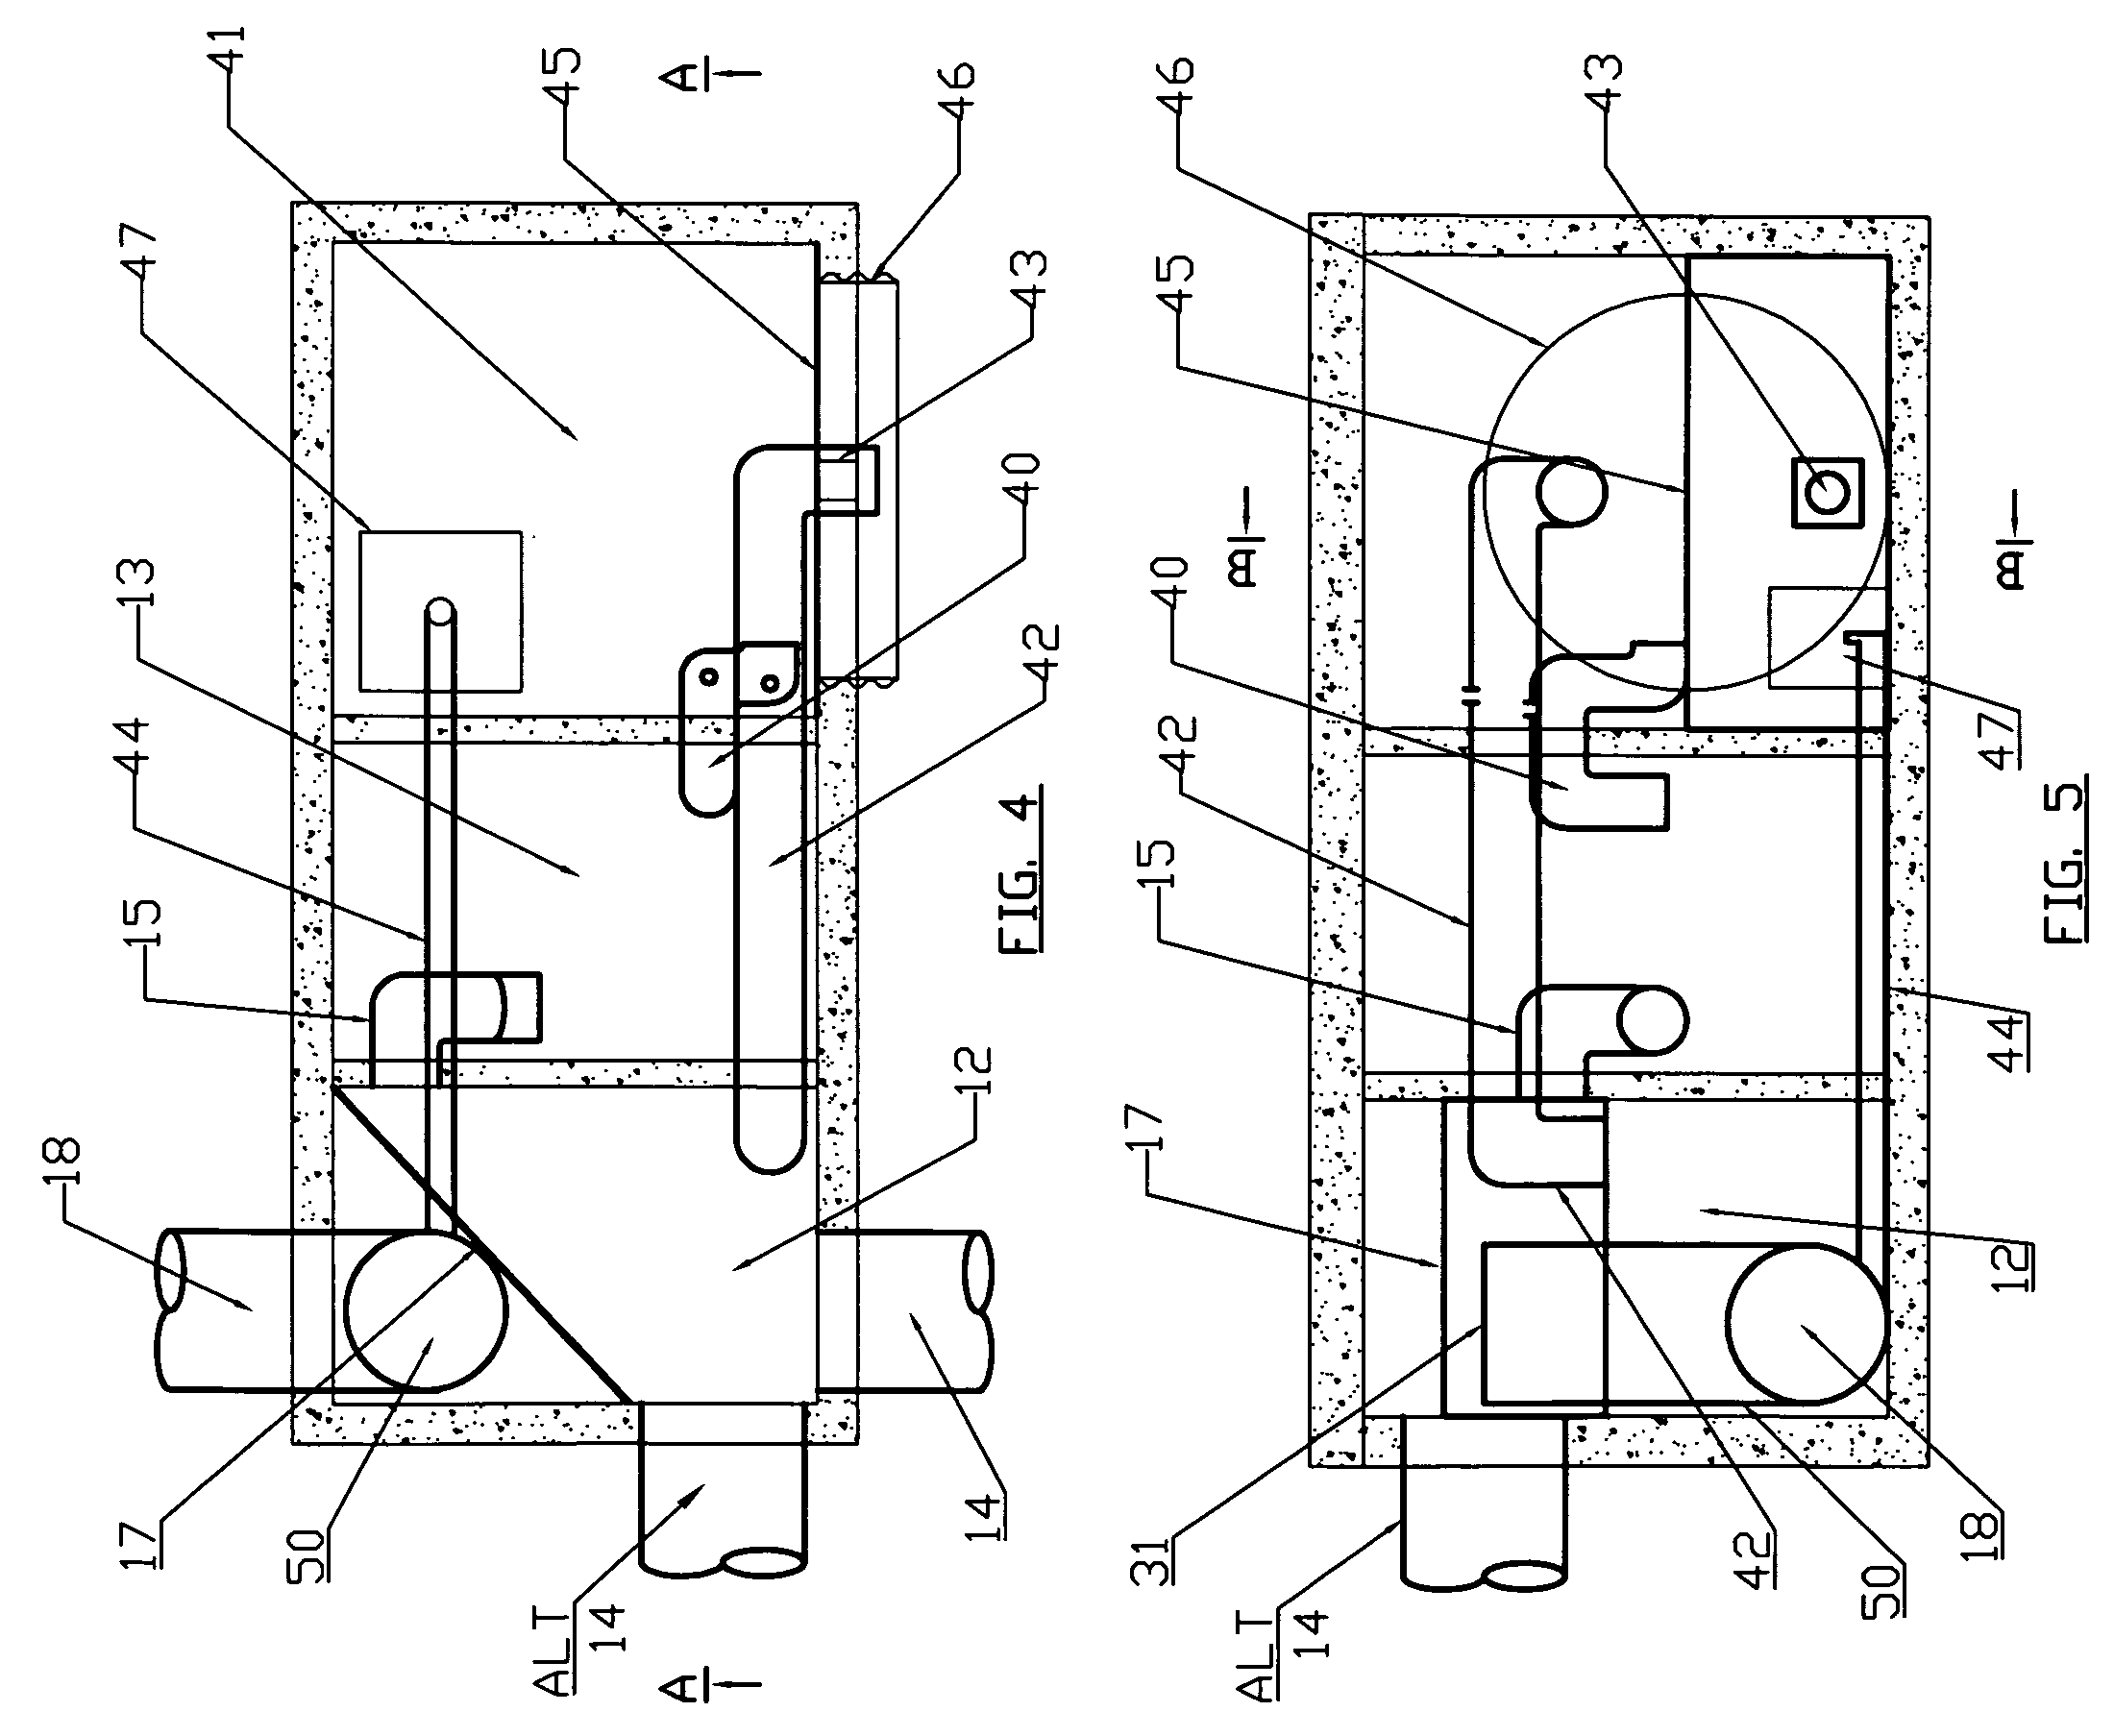 Combination physical separator and filter device to remove contaminants from stormwater runoff